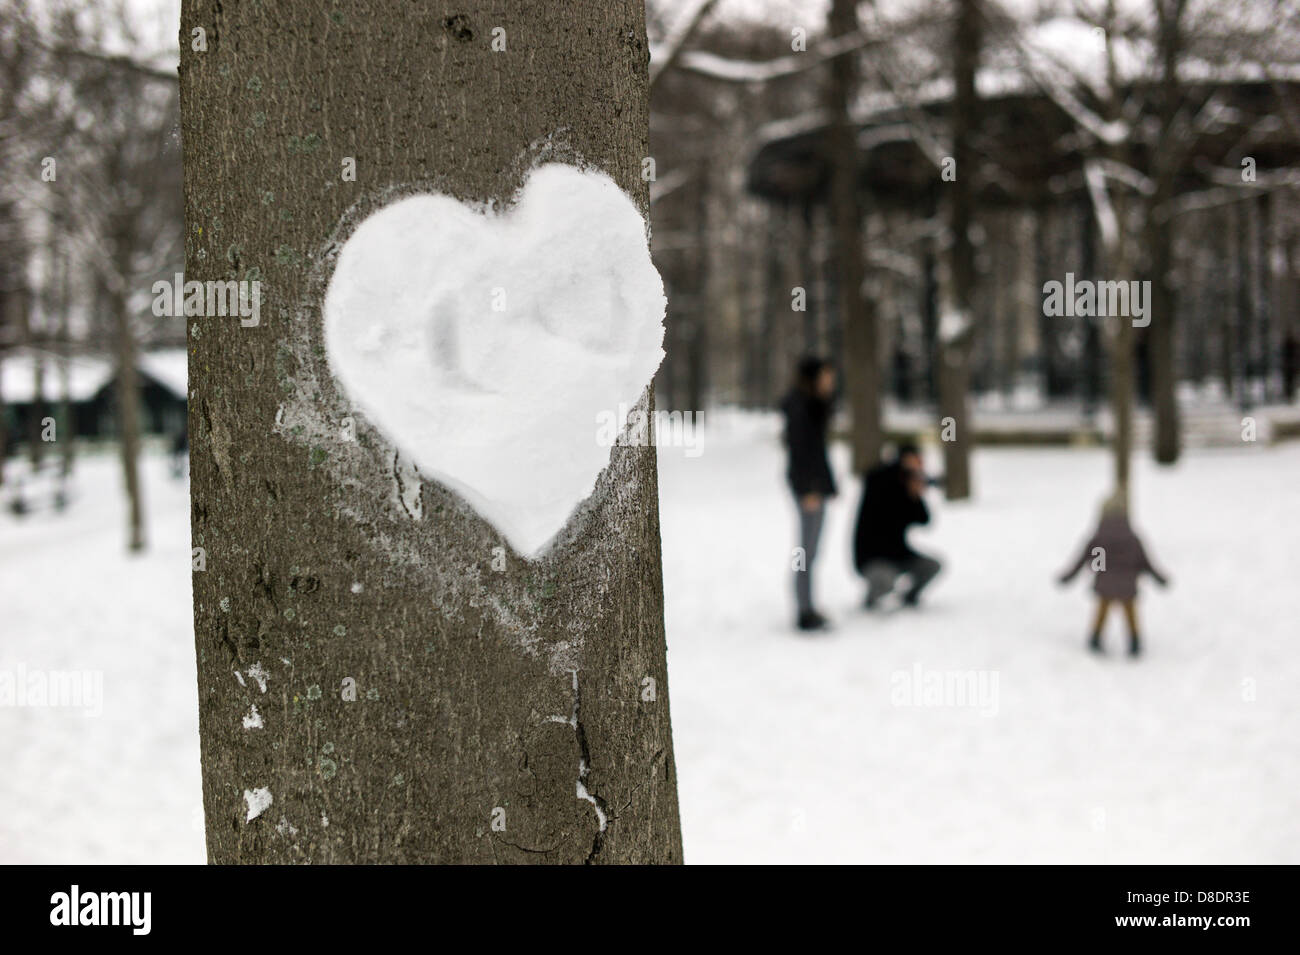 Love heart made of snow on a tree. Stock Photo